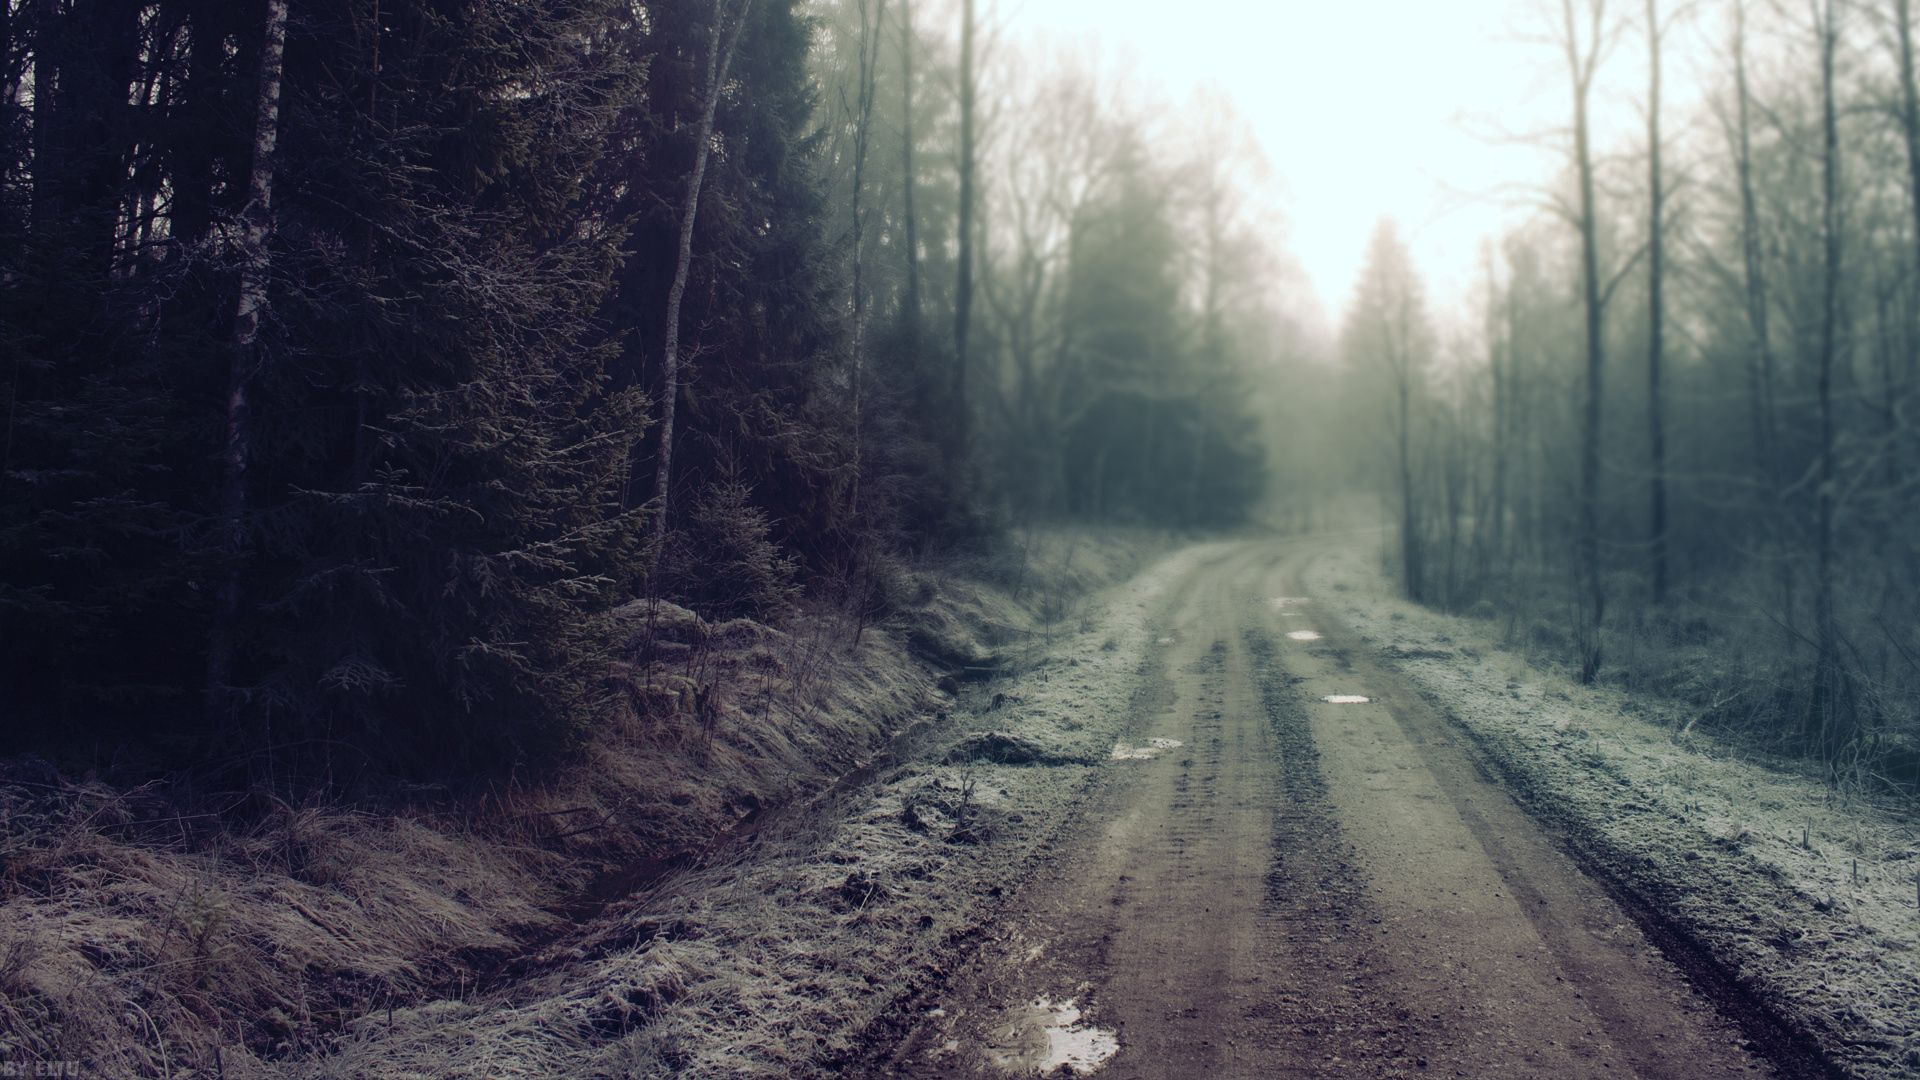 android gloomy, nature, road, forest, country, secret, mystery, puddles, countryside